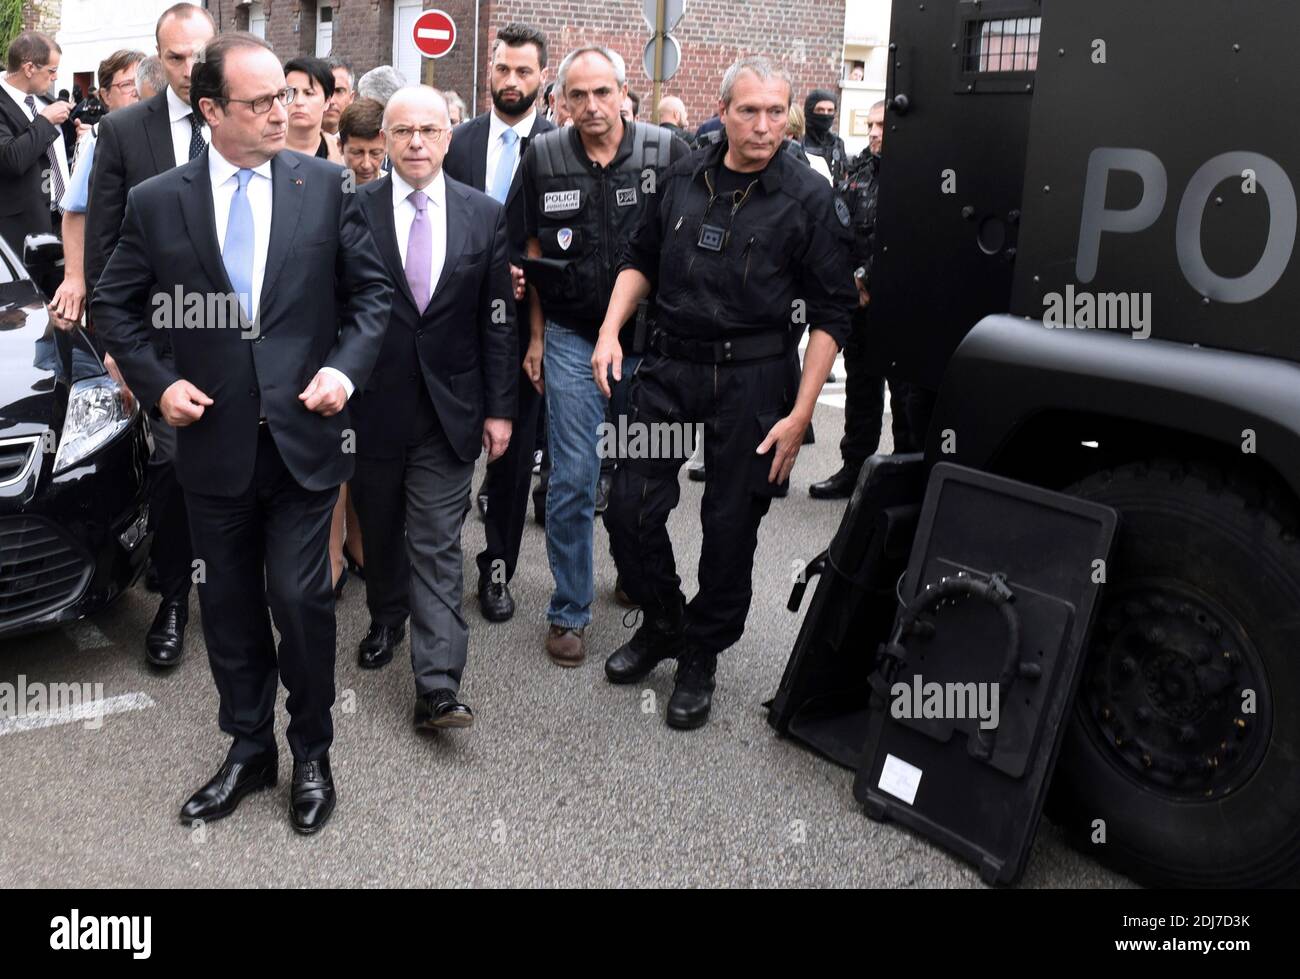 French President Francois Hollande (L), followed by French Interior Minister Bernard Cazeneuve (C) and Head of the RAID, the French national police intervention group Jean-Michel Fauvergue (R), arrives in Saint-Etienne-du-Rouvray, western France on July 26, 2016, after a hostage-taking at a church of the town that left the priest dead. Two men who attacked a church and slit the throat of a priest had 'claimed to be from Daesh', using the Arabic name for the Islamic State group. Police said they killed two hostage-takers in the attack in the Normandy town of Saint-Etienne-du-Rouvray, 125 kilome Stock Photo